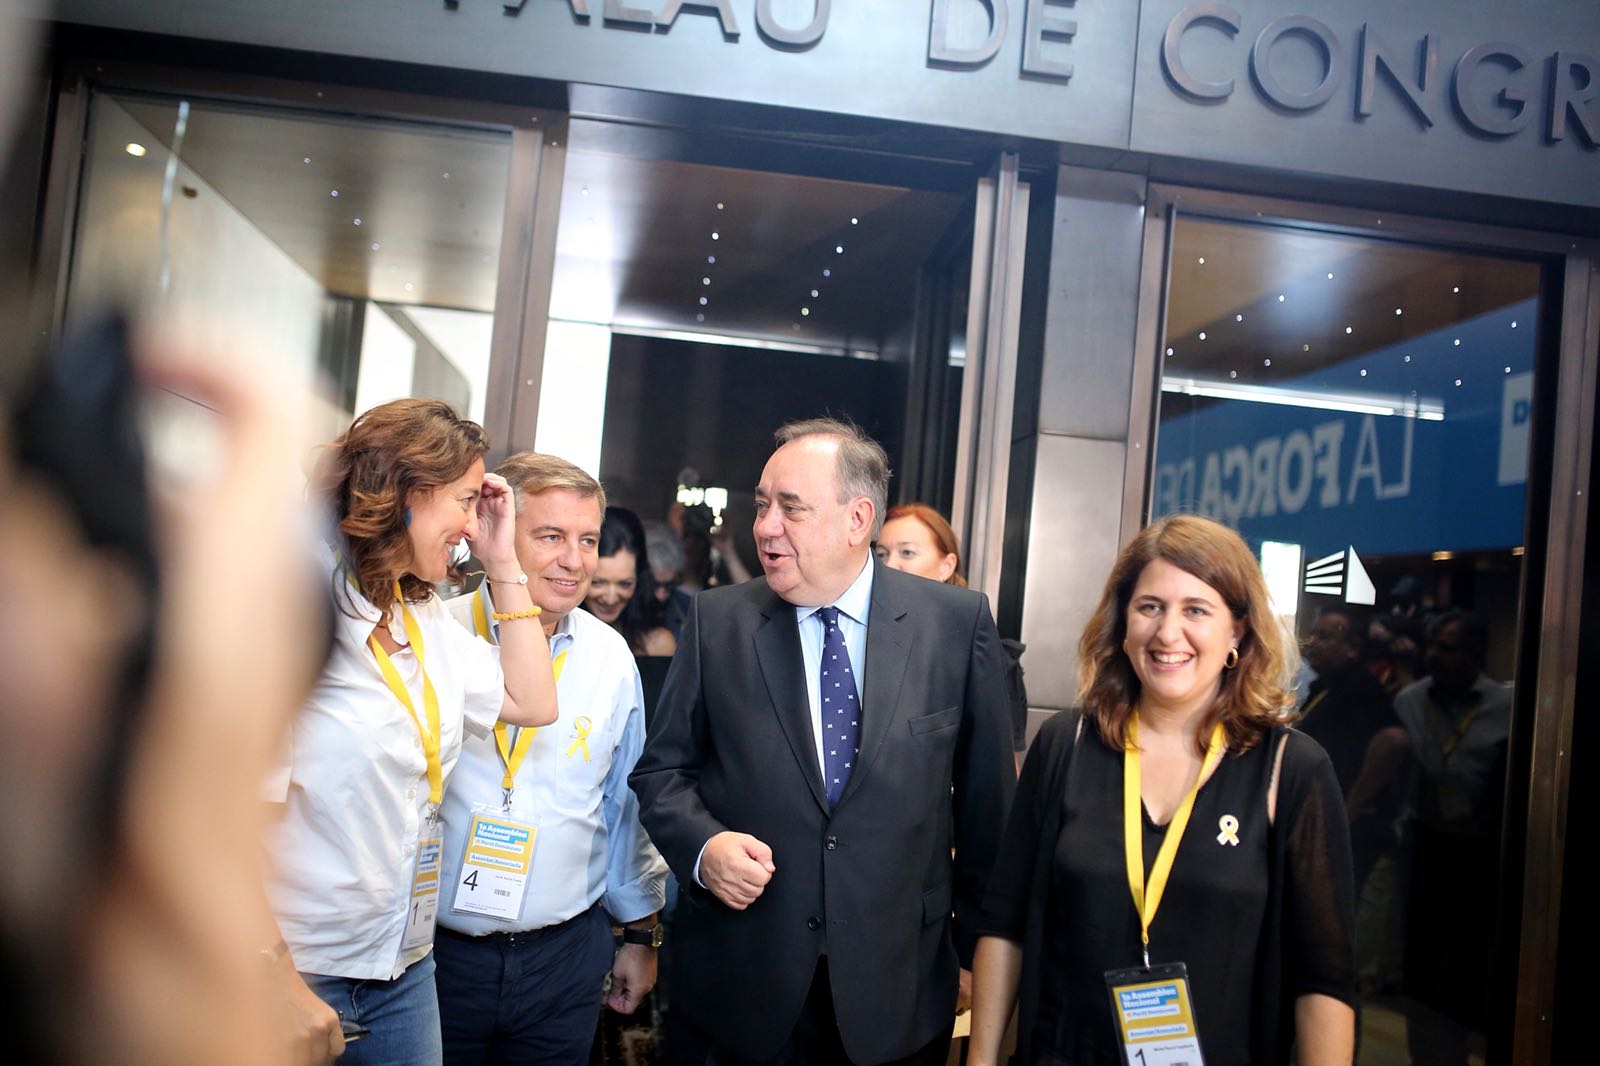 Salmond, to Catalans: “Your dream of freedom will never die”